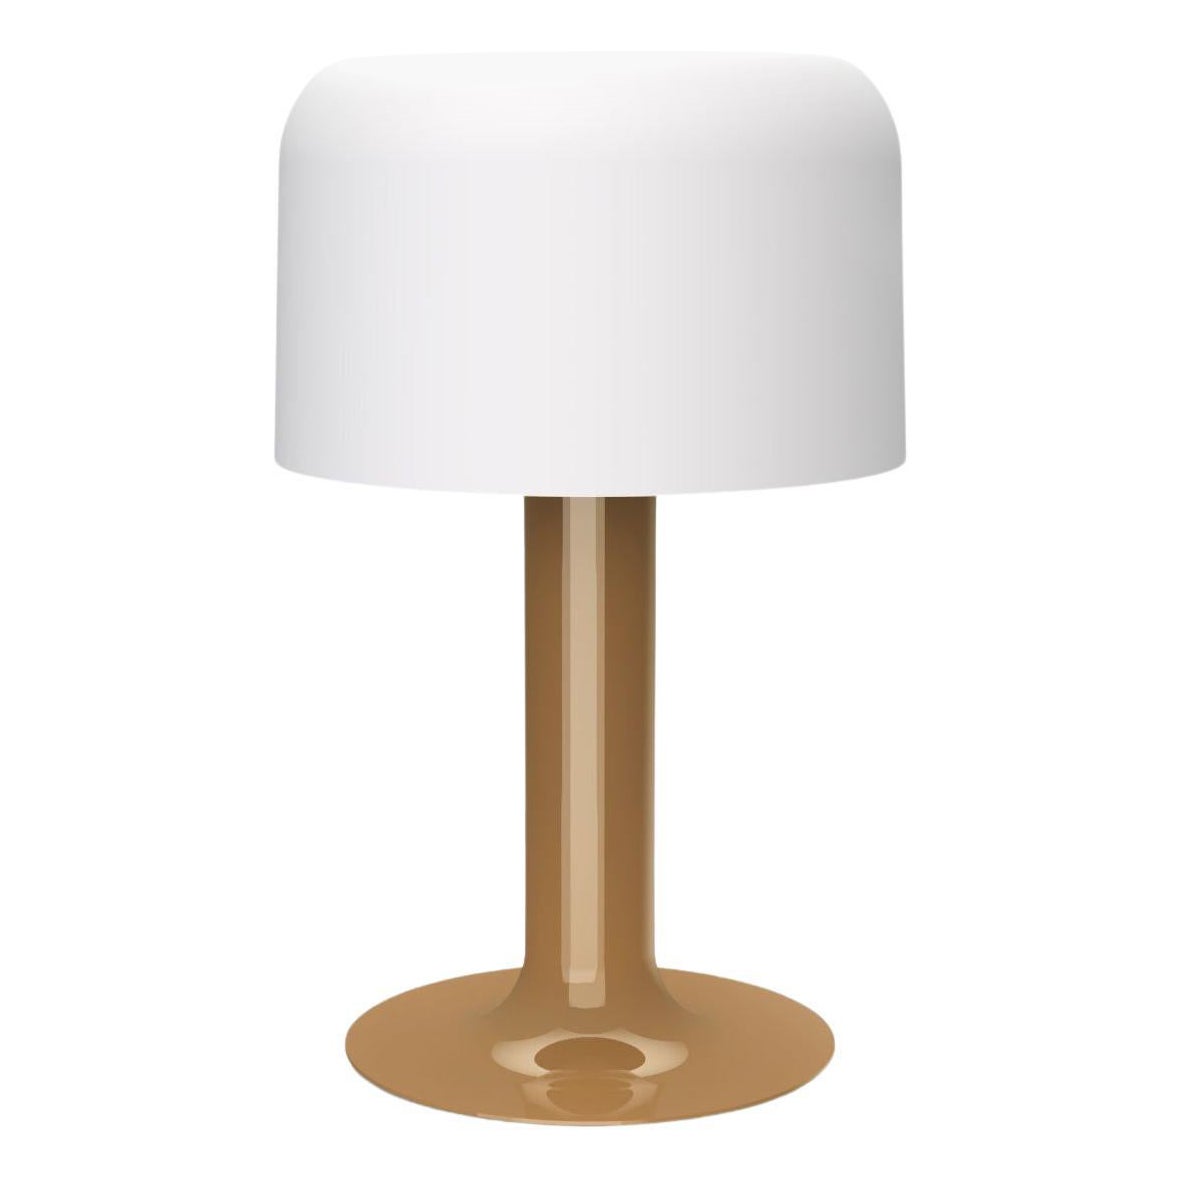 Michel Mortier 10497 Metal and Glass Table Lamp for Disderot in Chamois